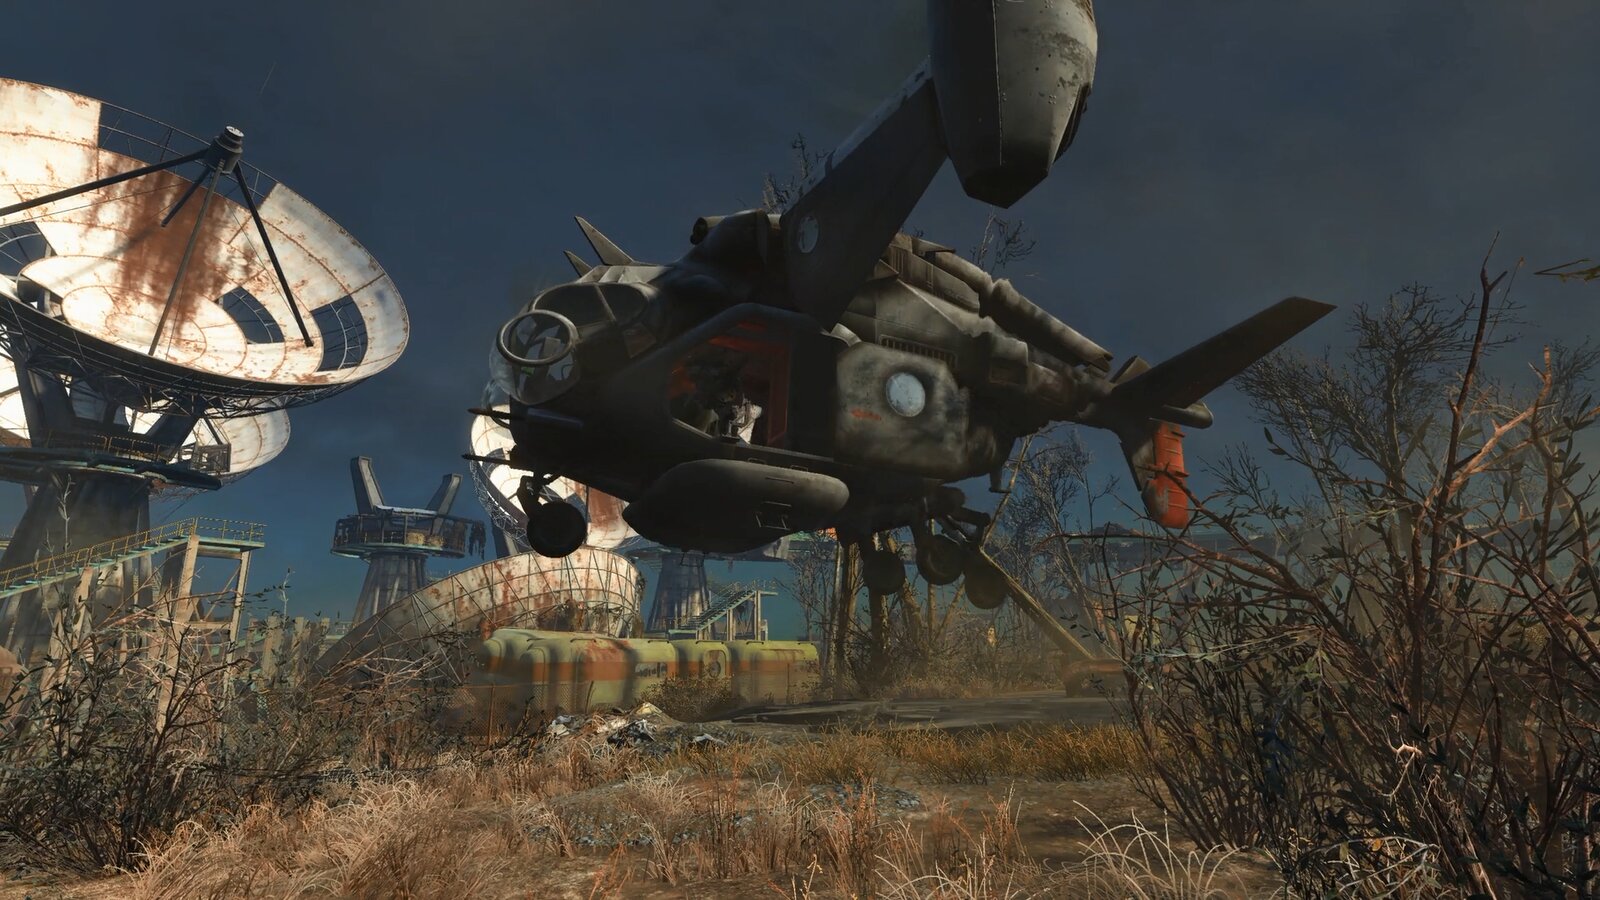 винтокрыл fallout 4 ps4 фото 19